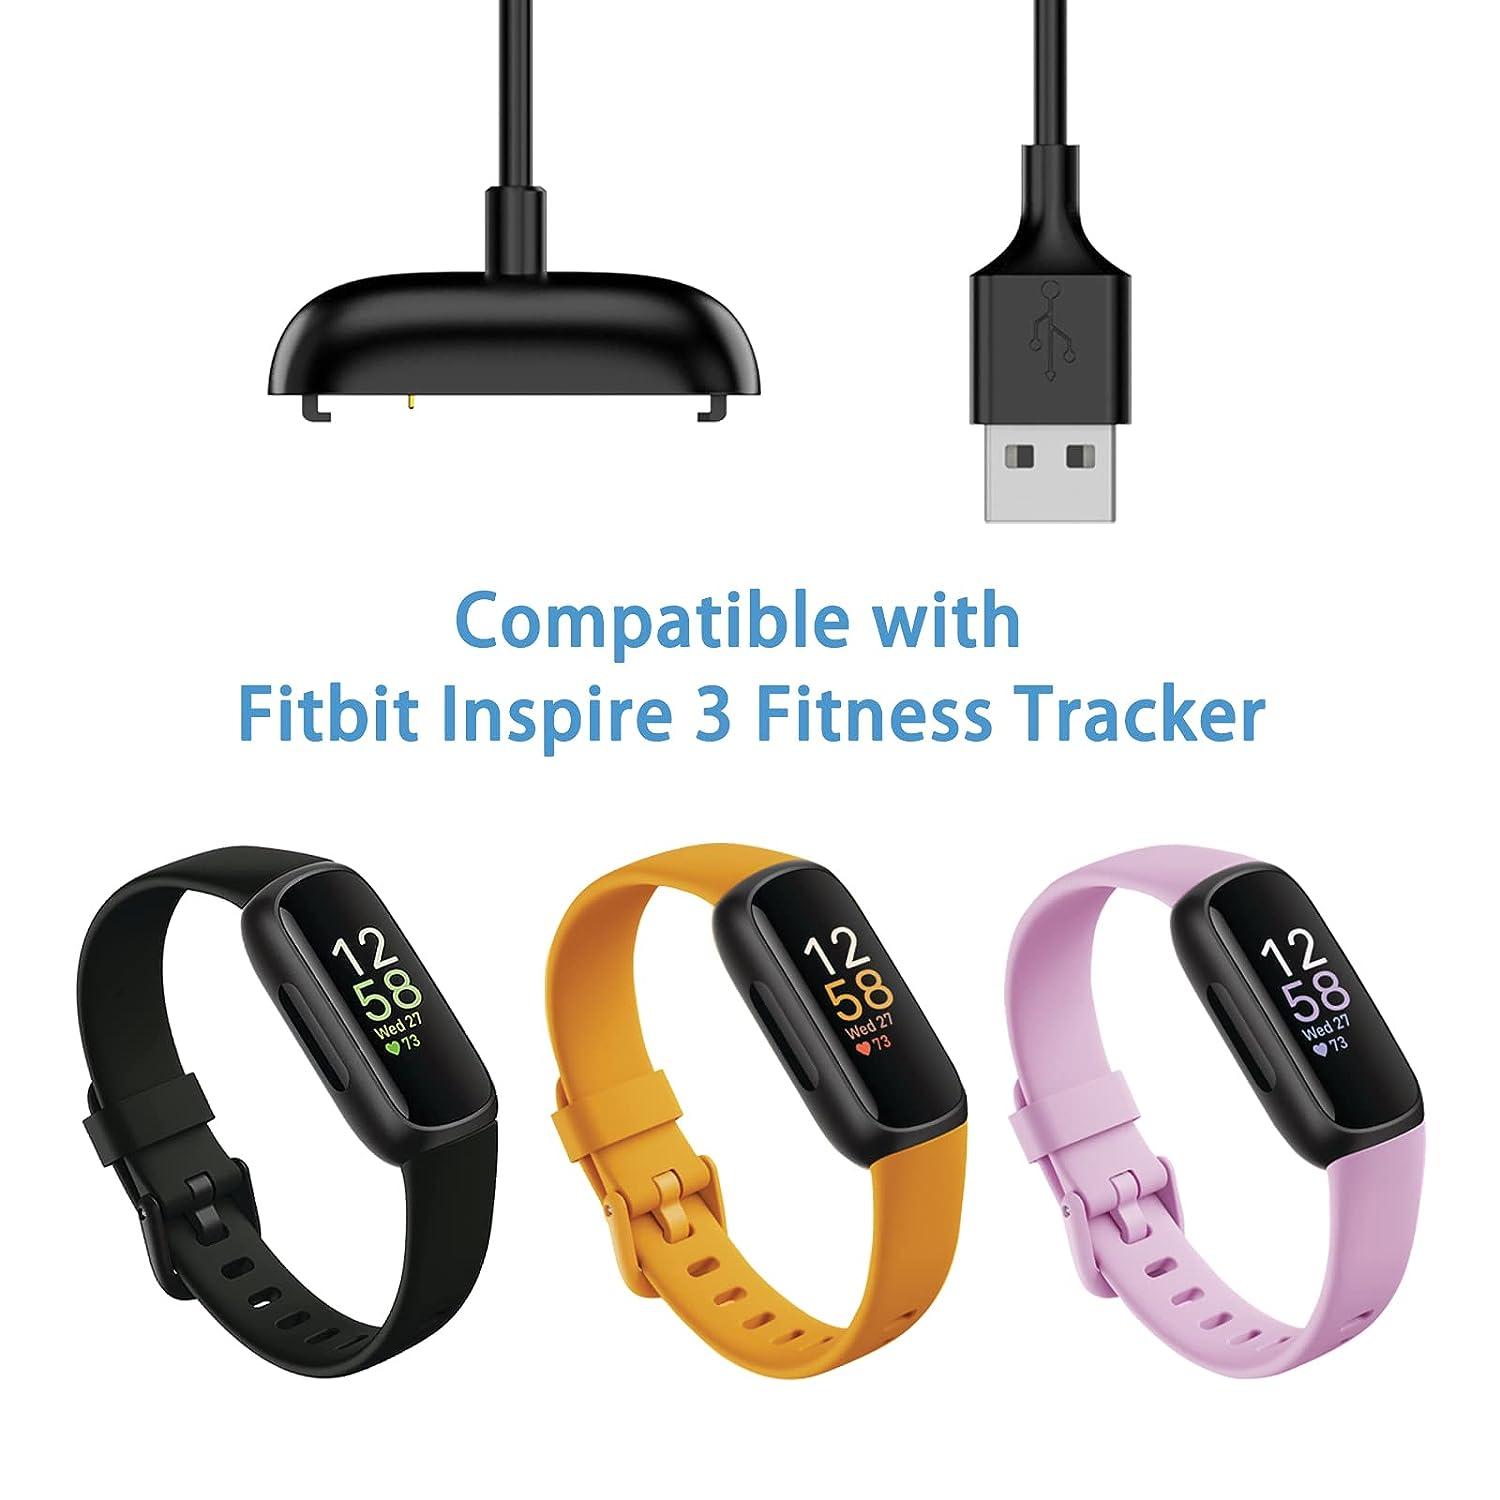 Fitbit Inspire 3 | Health & fitness tracker